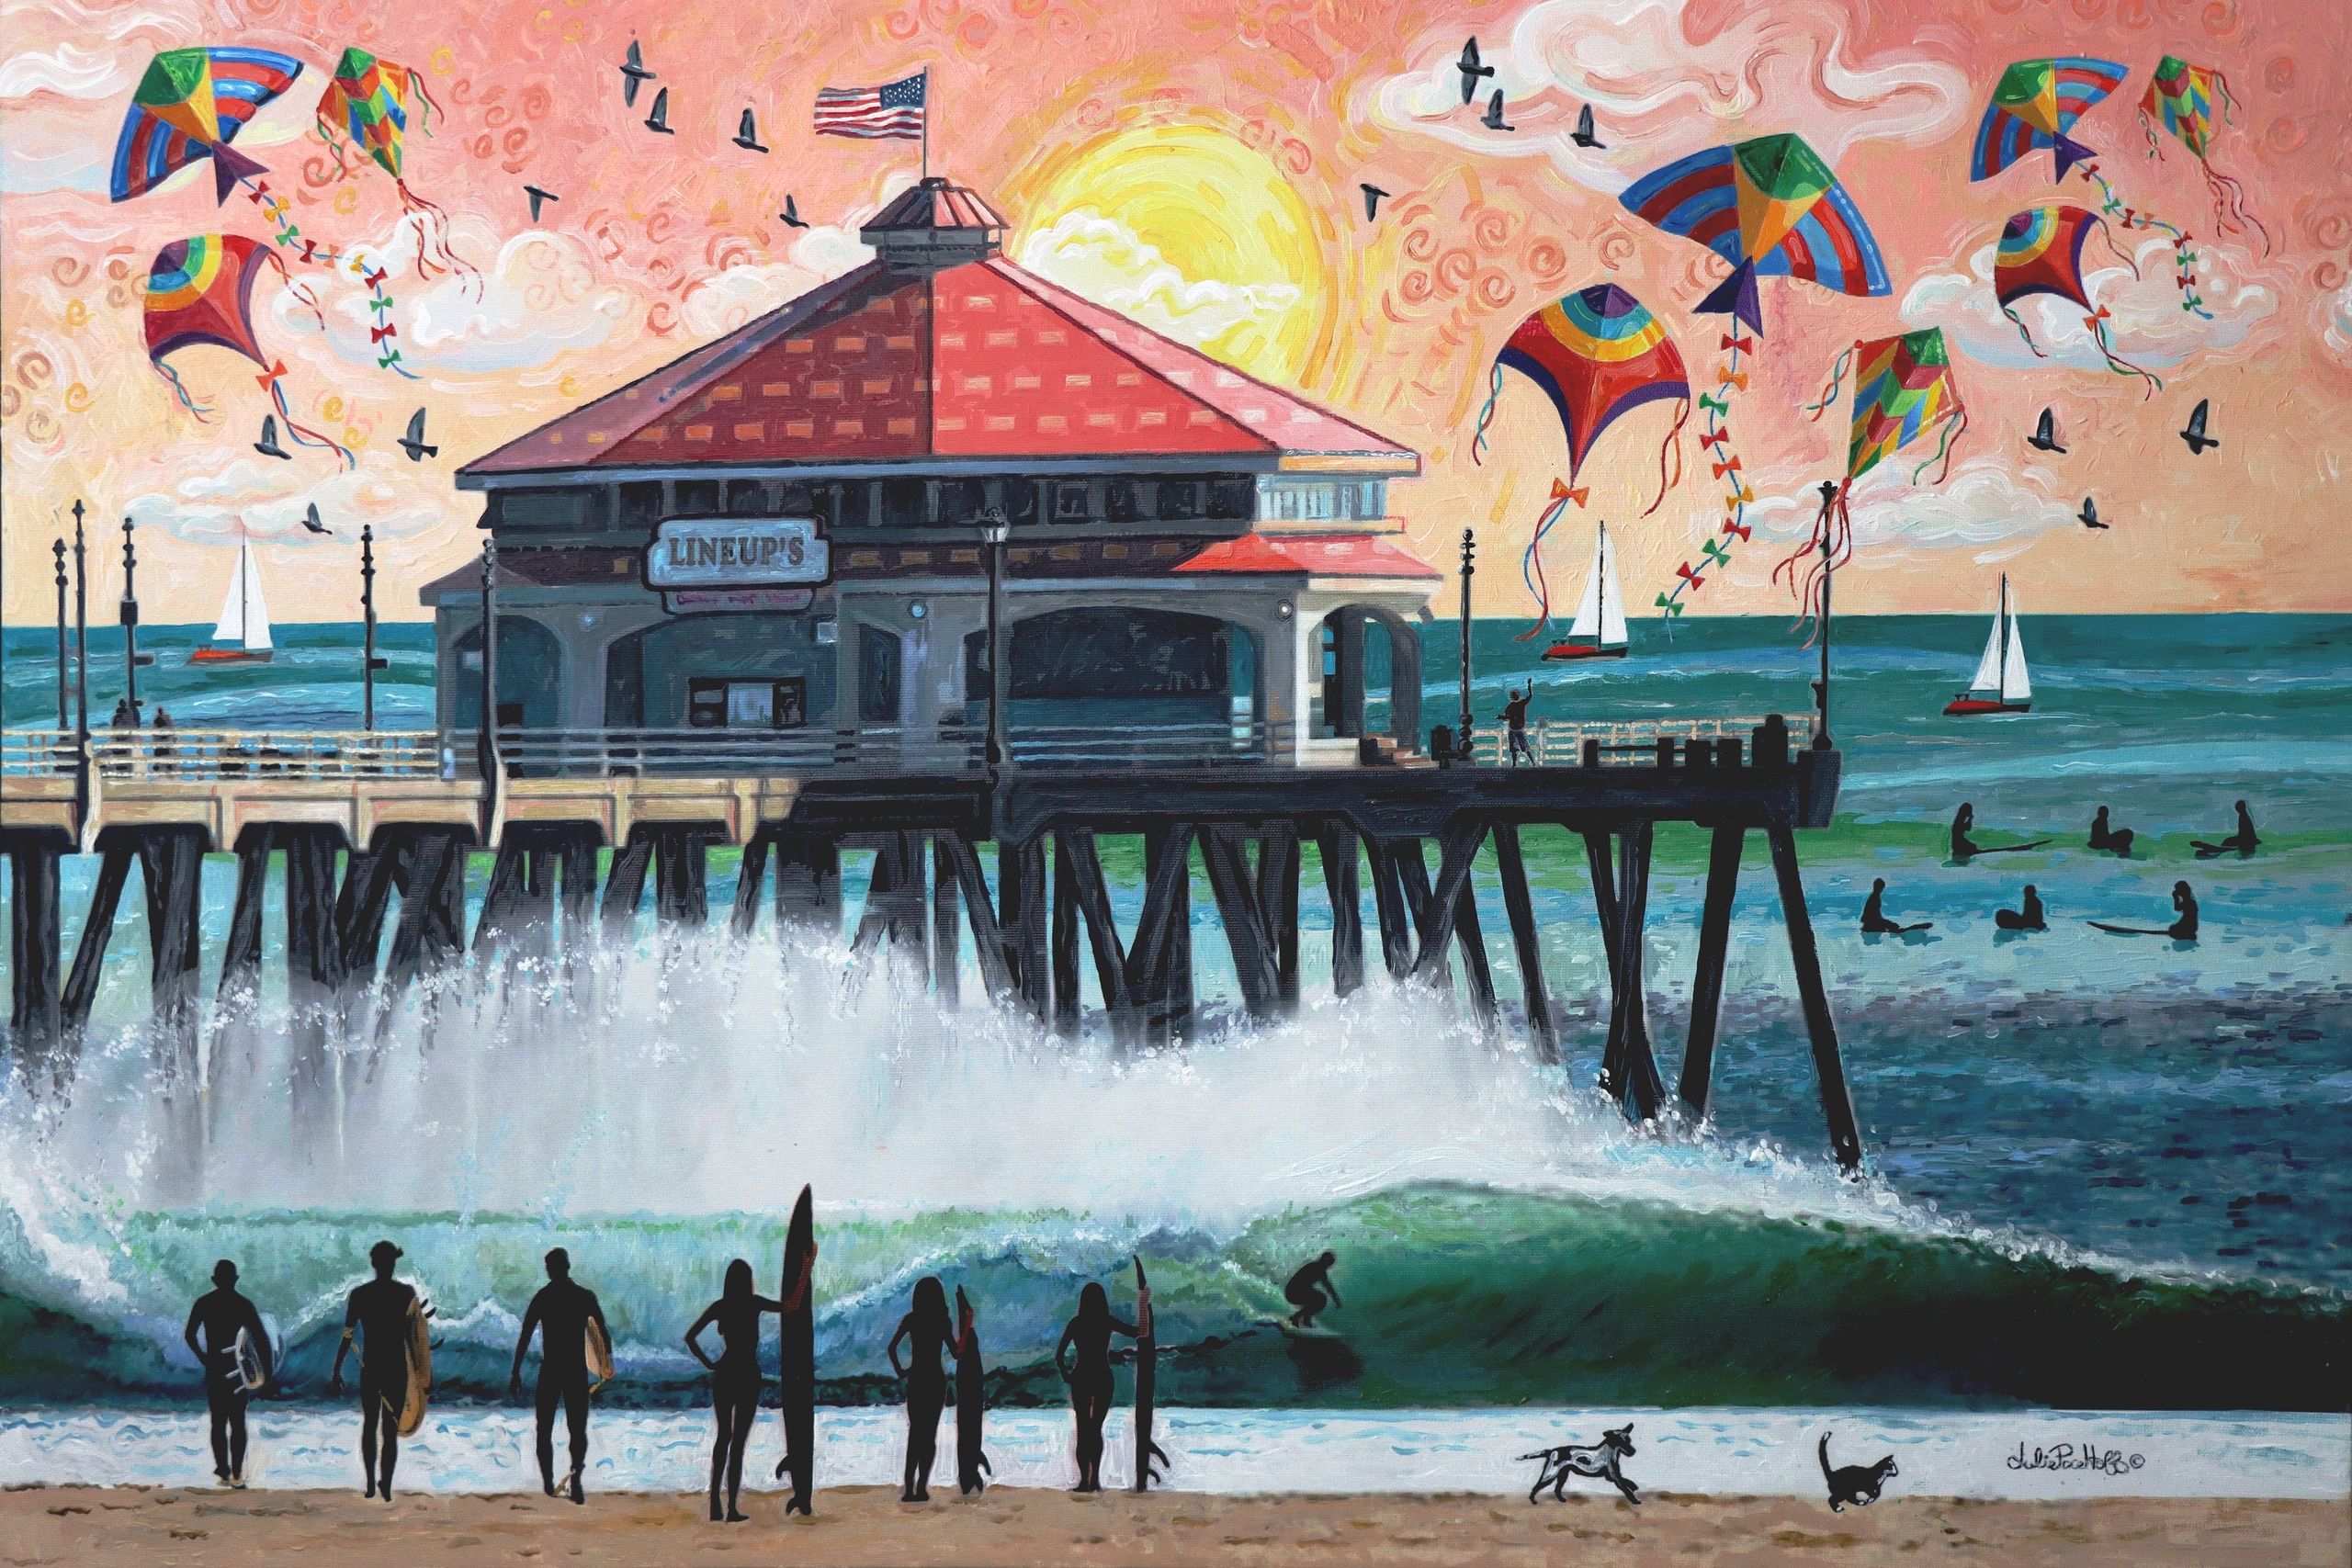 Vintage ocean pier with surfers and kites.